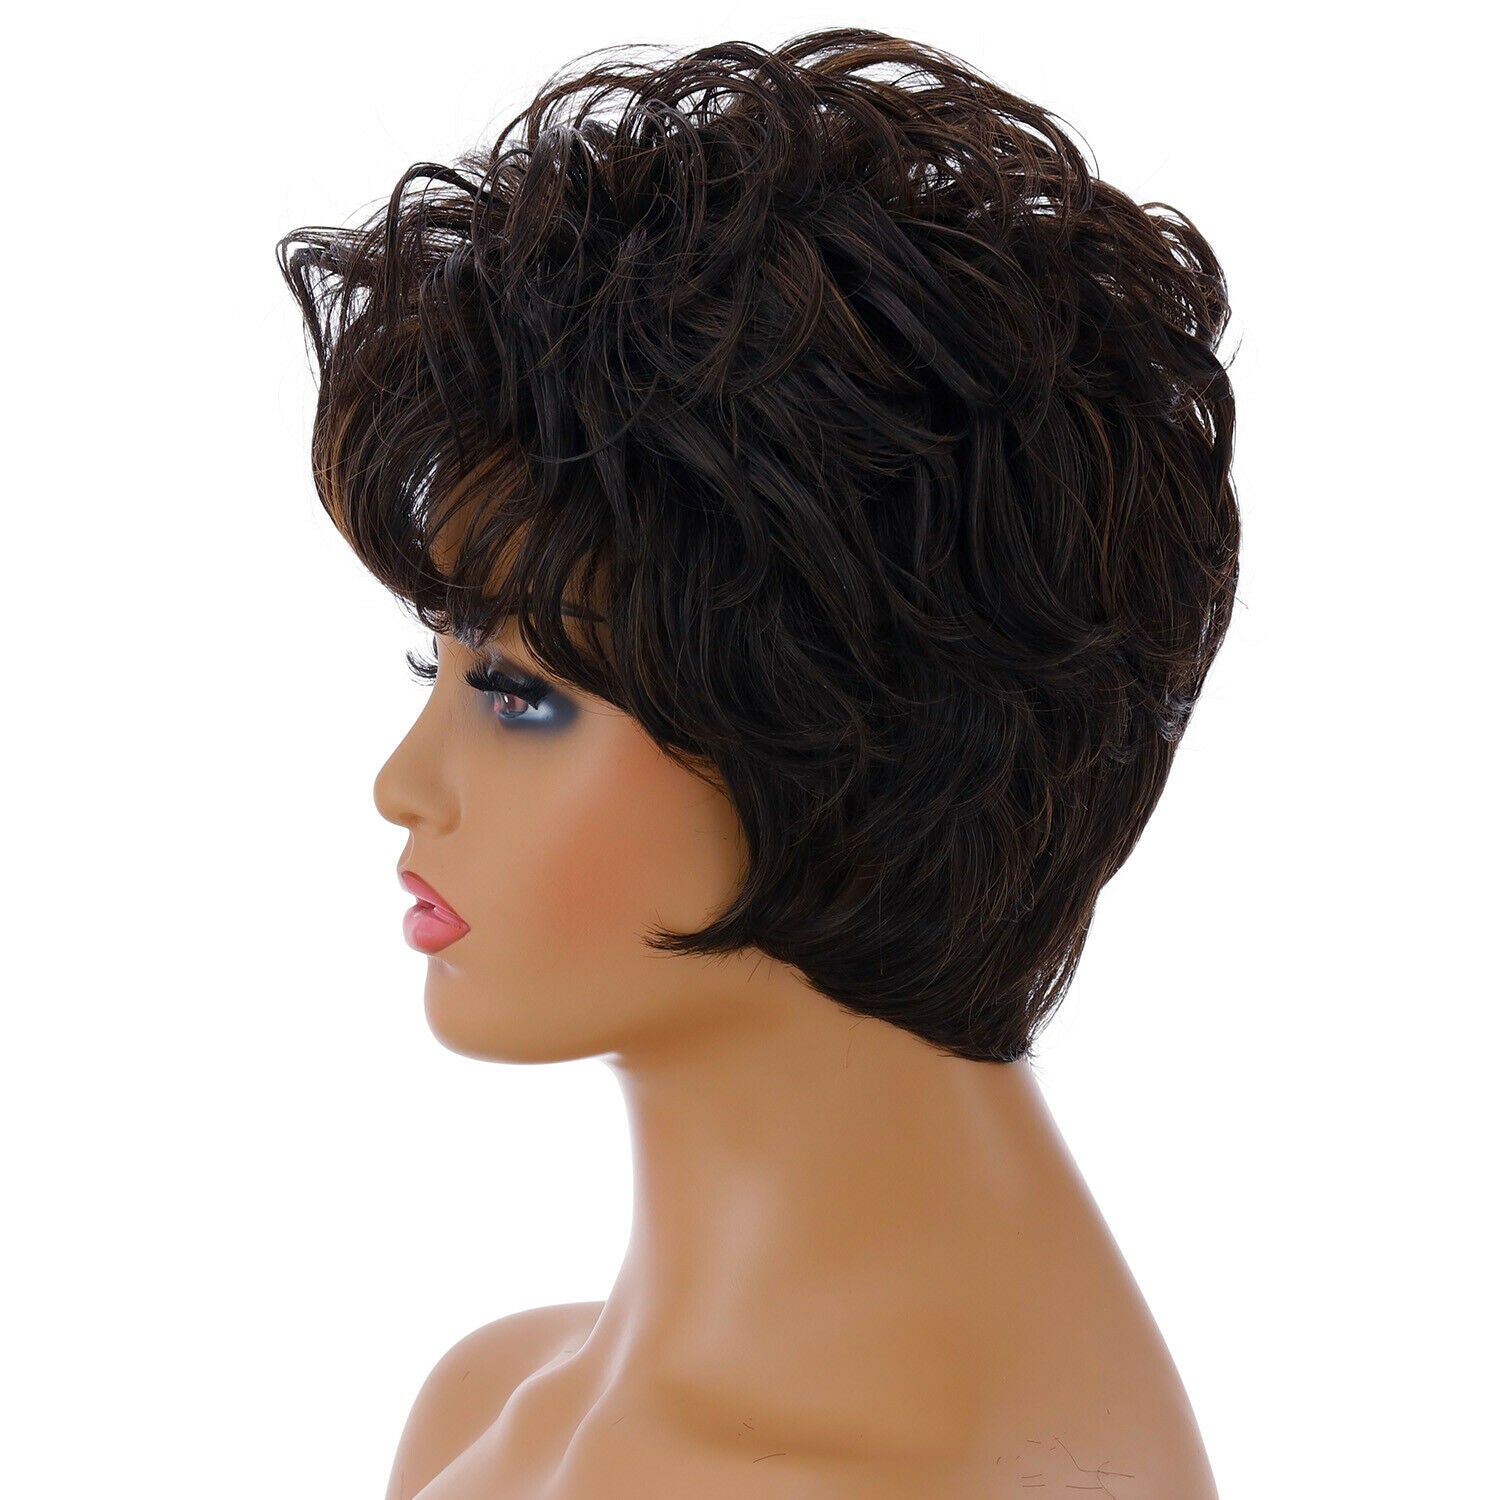 Short Curly Hair With Air Bangs And Fluffy For Women Parties Black Brown Mixed